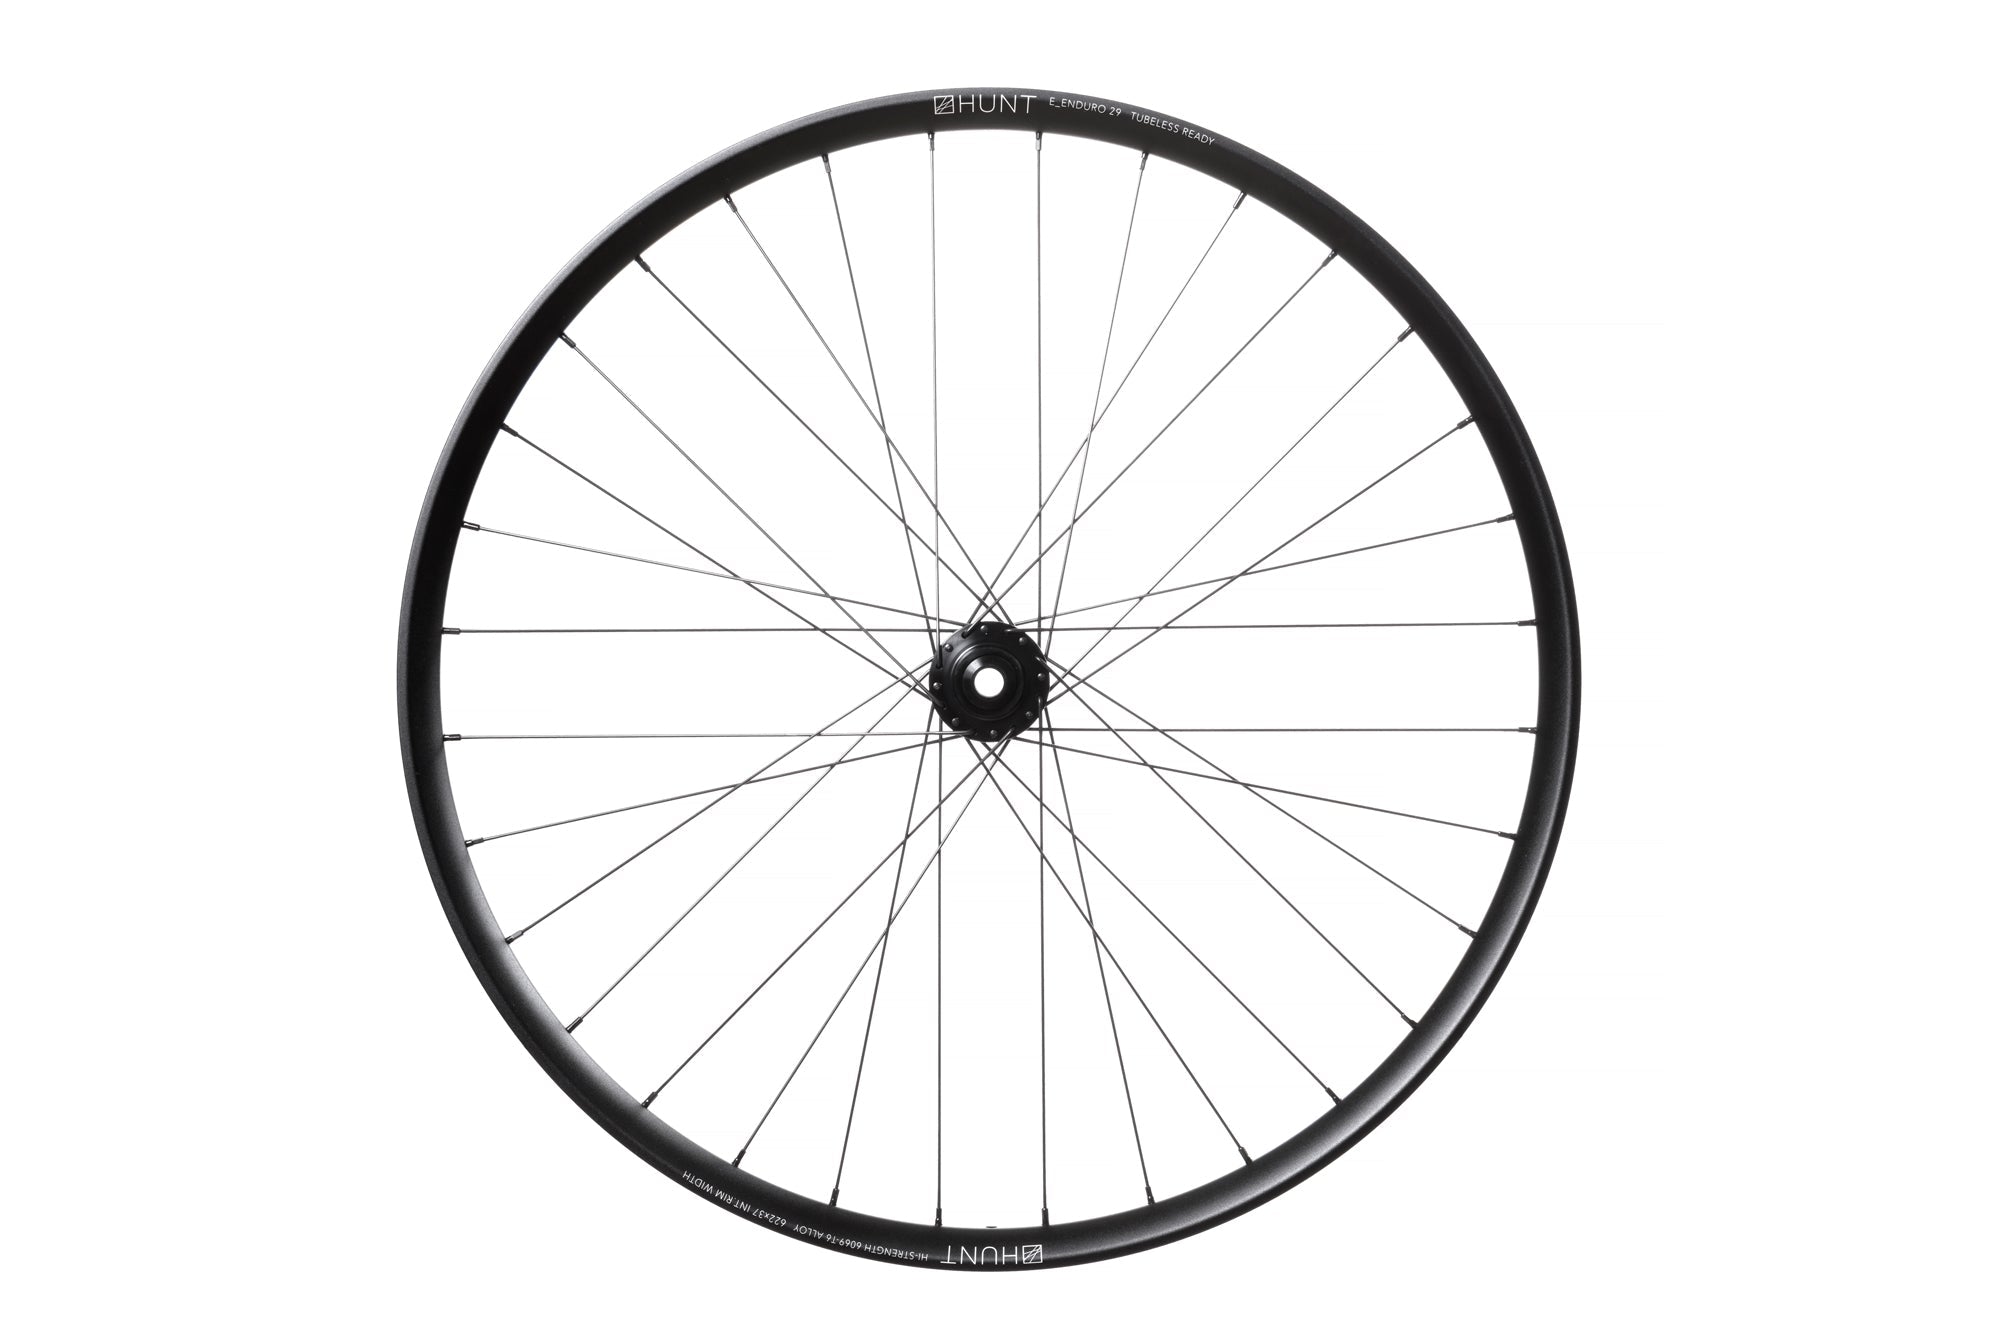 <html><h1>Rims</h1><i>The E_Enduro Wide rim includes details which are high on the durability factor to make sure you finish every ride or stage. The 6069-T6 (+69% tensile strength vs 6061-T6) welded rim sticks with the wider-is-better mantra with an internal 37mm (internal) width. Optimized for 2.5"-2.8" tyres, the E_Enduro Wide rim provides support to the tyre during hard cornering or hucking off that step-down you've been eying off for a few months!</i></html>